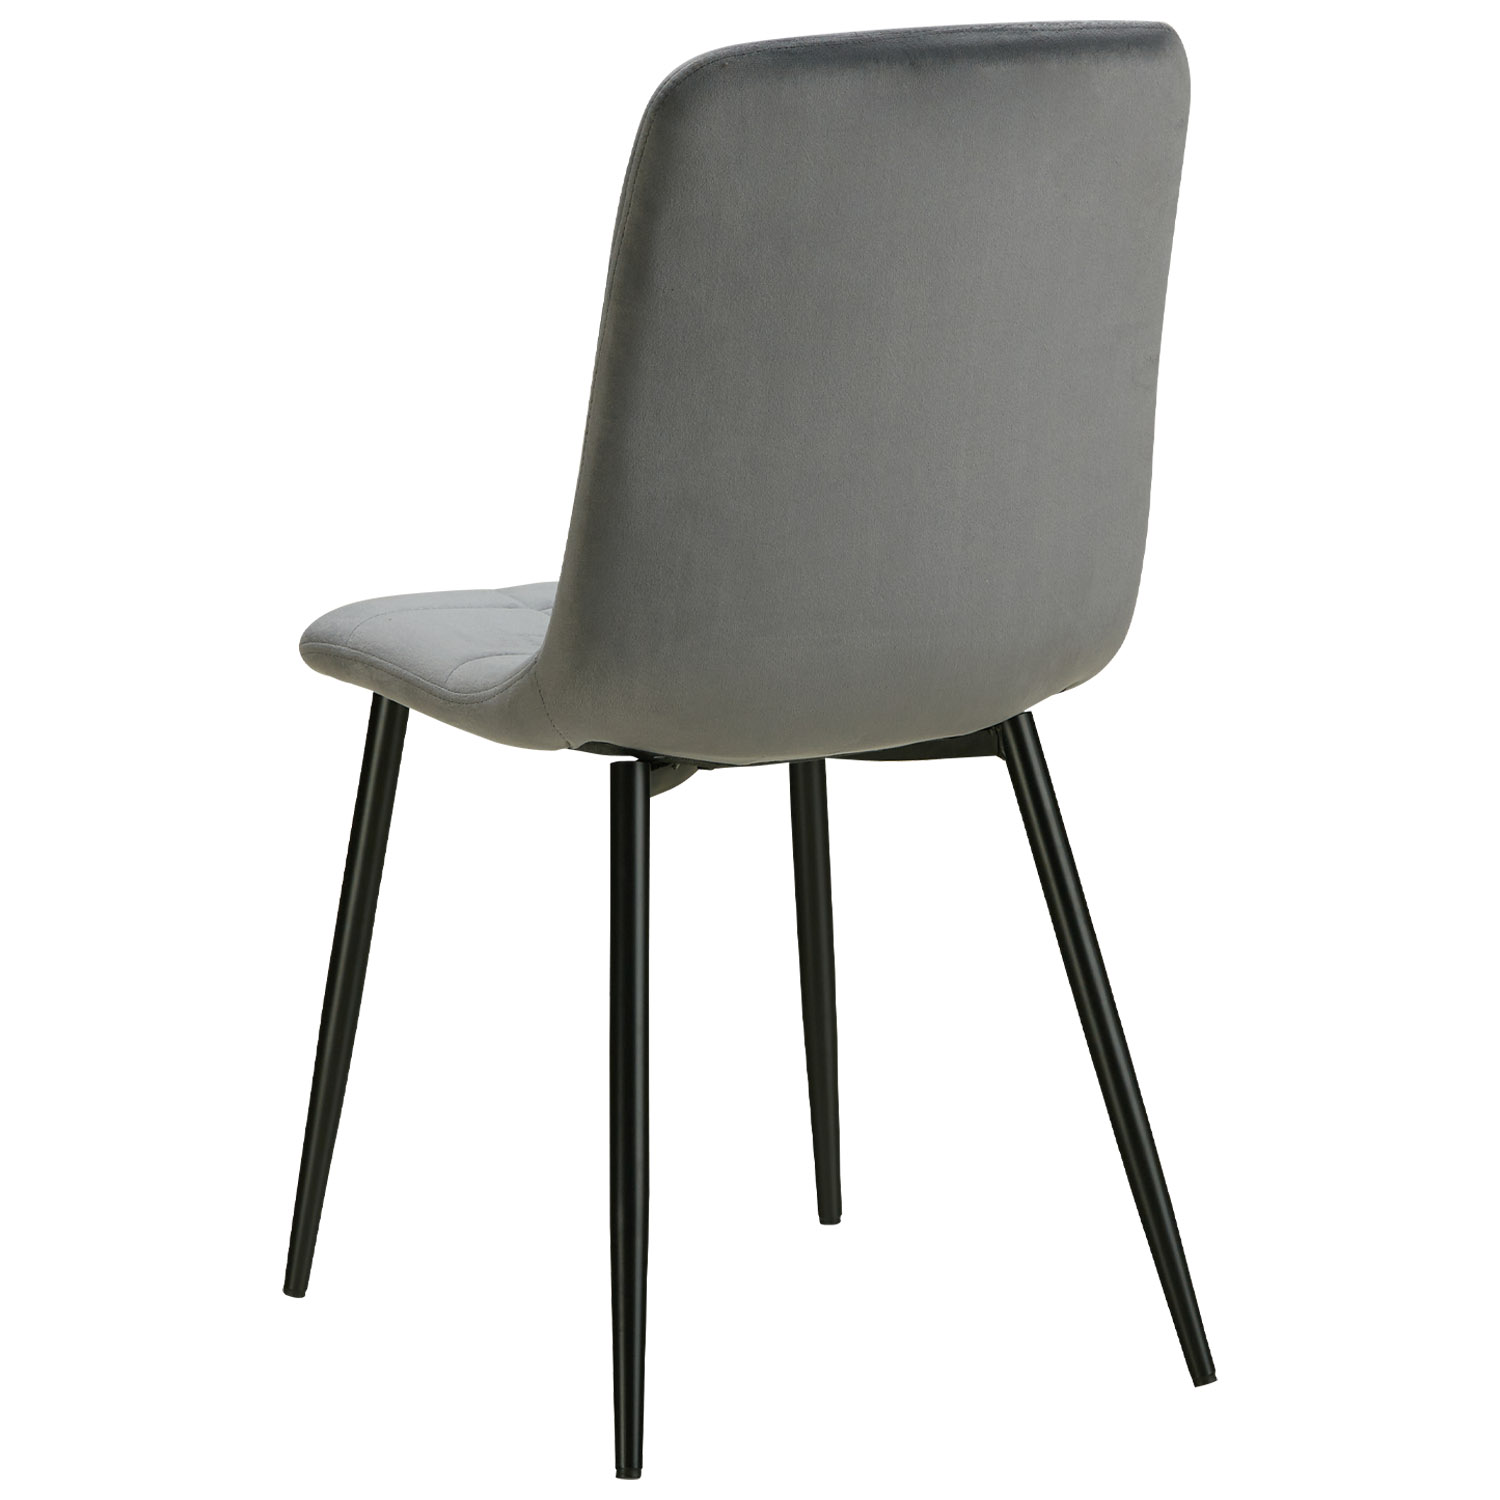 Dining Chair Set of 4 Egg Chairs Grey Armchairs Dining Room Chairs Upholstered Chairs Eames Chairs